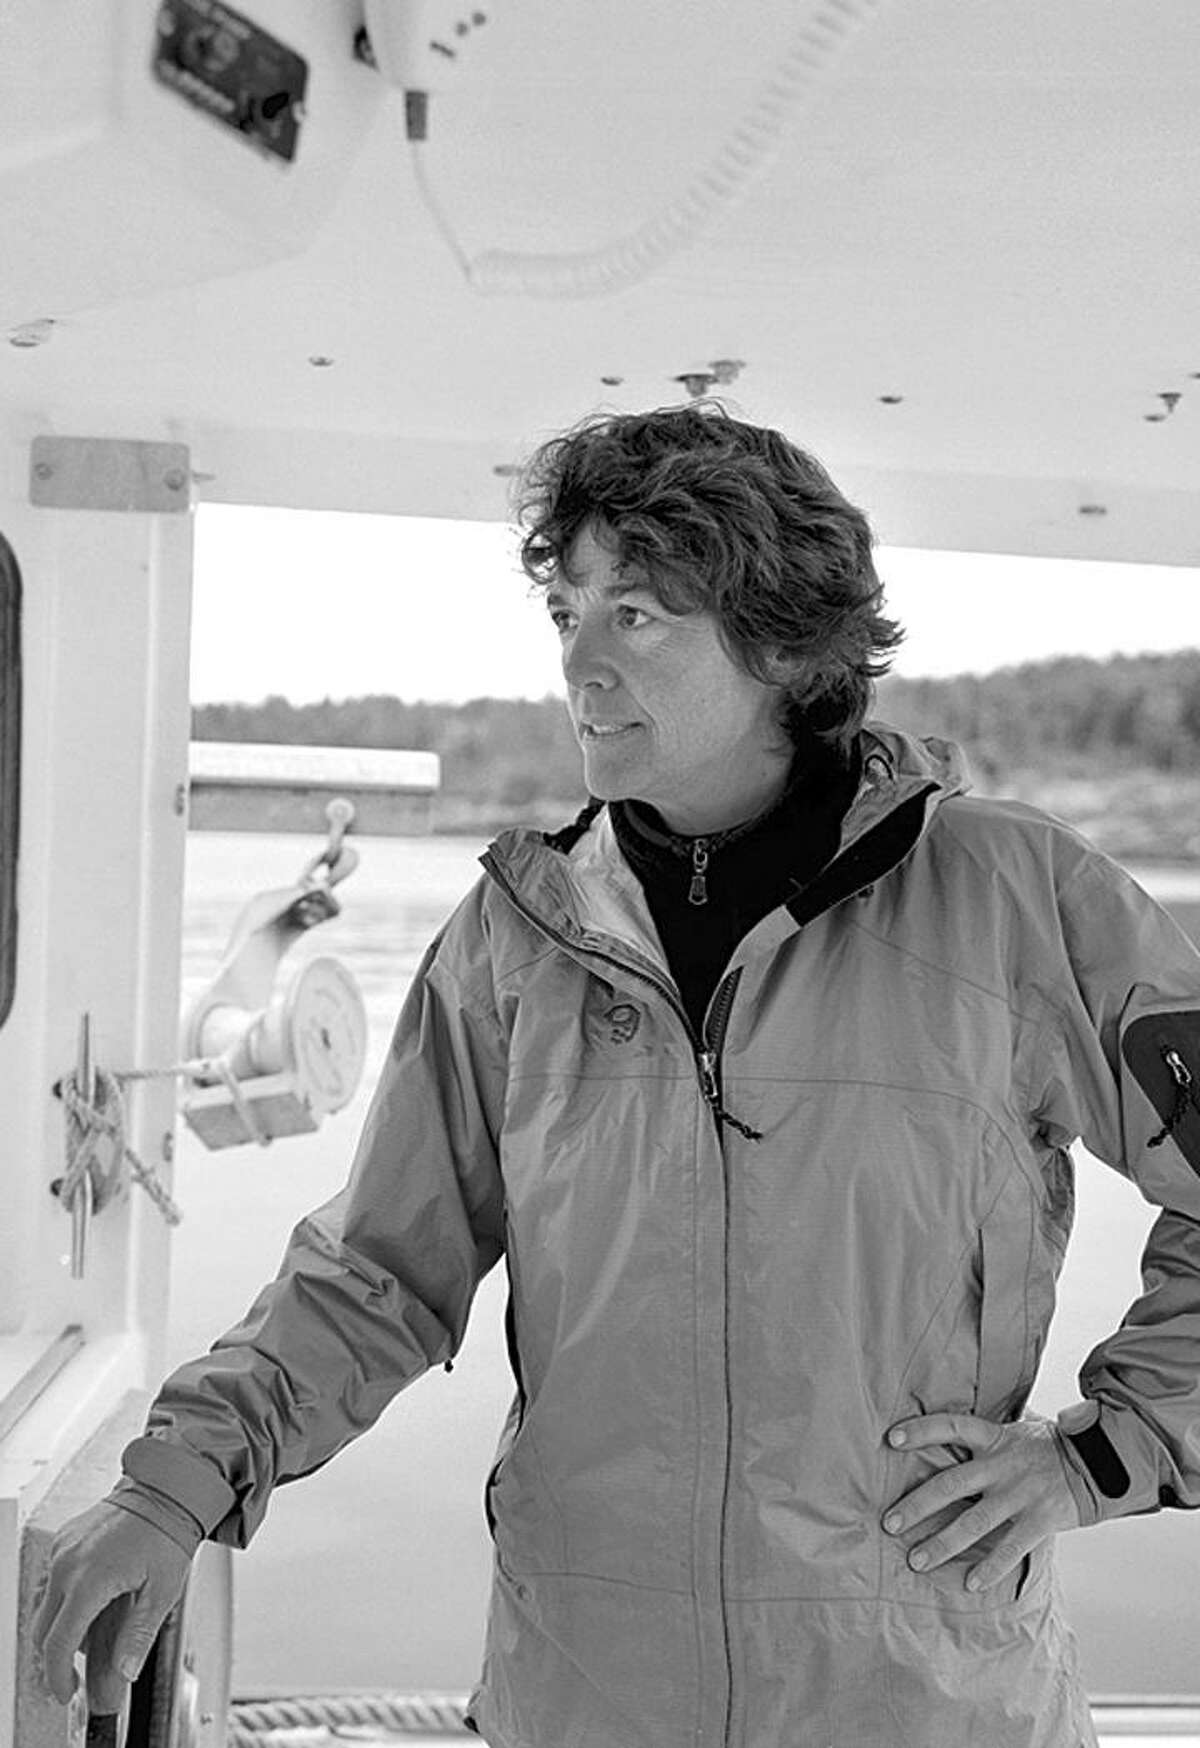 After a Japanese boat enters the Grand Banks off Newfoundland and nabs from the fleet the best spot to catch swordfish, Capt. Linda Greenlaw of the Hannah Borden takes action on "Swords: Life on the Line" (Journal Register News Service)